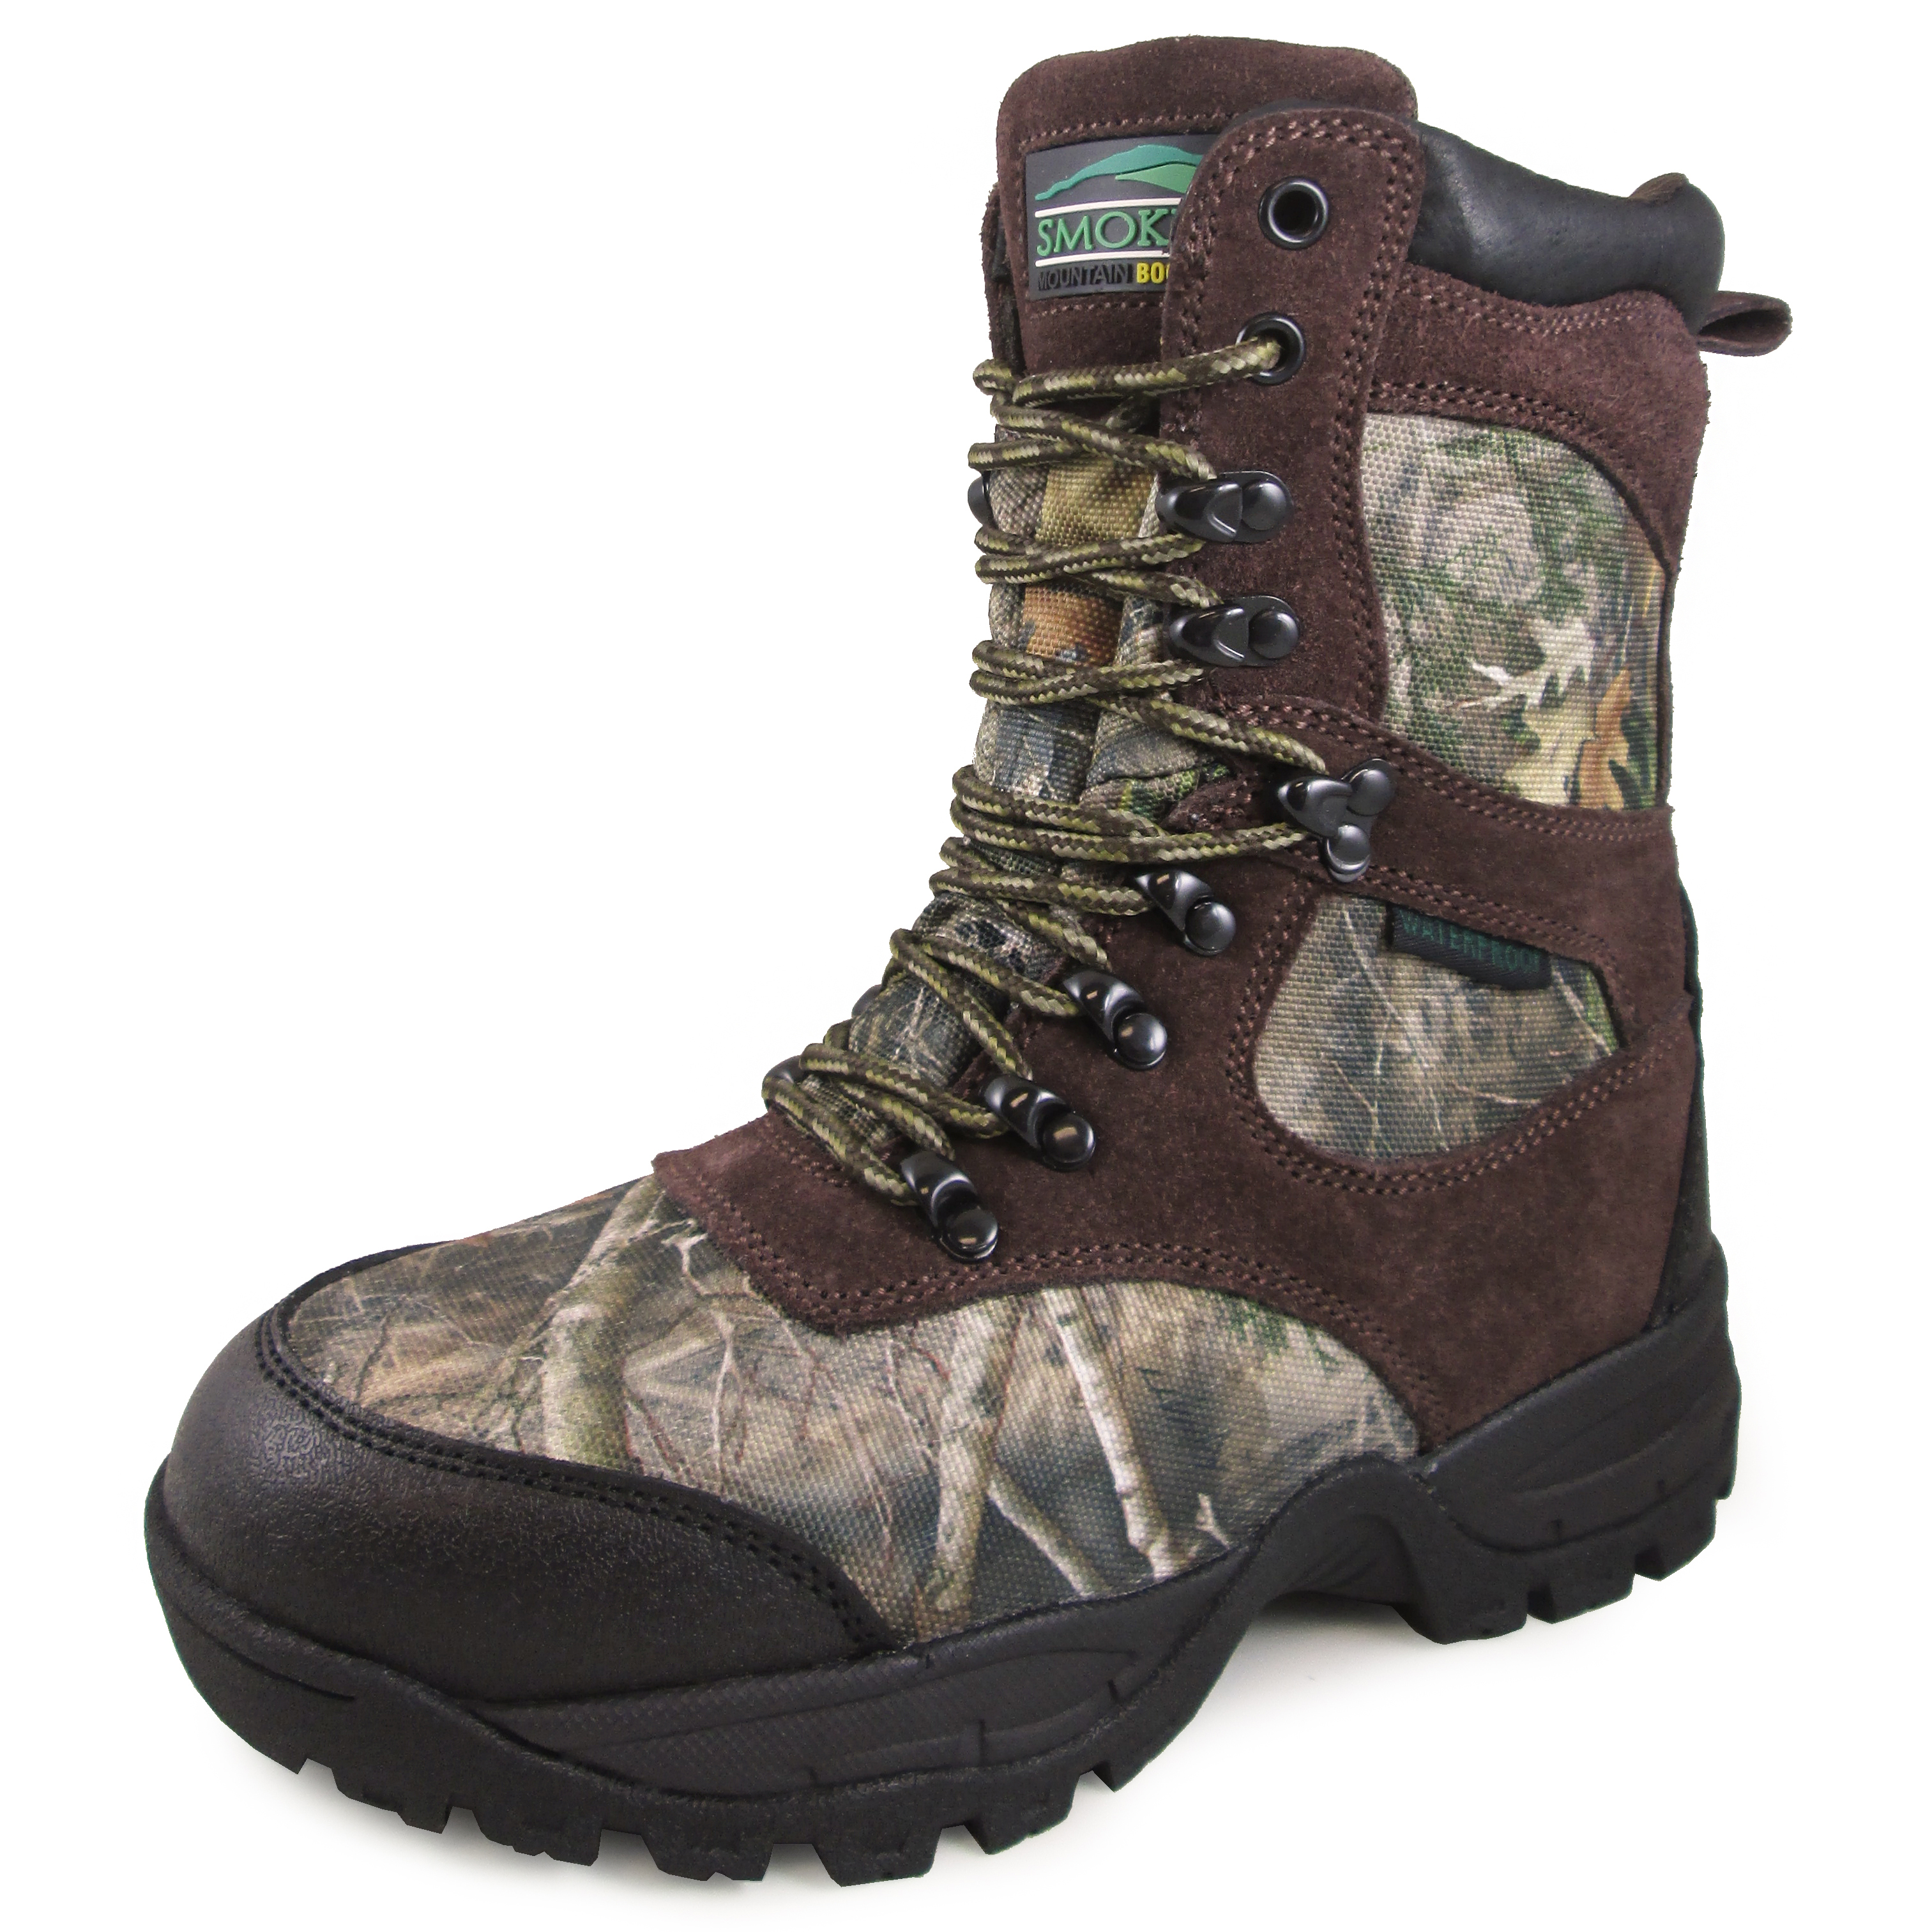 Smoky Mountain Boots Kid's Sportsman Brown/Camo Hunting Boot with 800 grams Thinsulate.